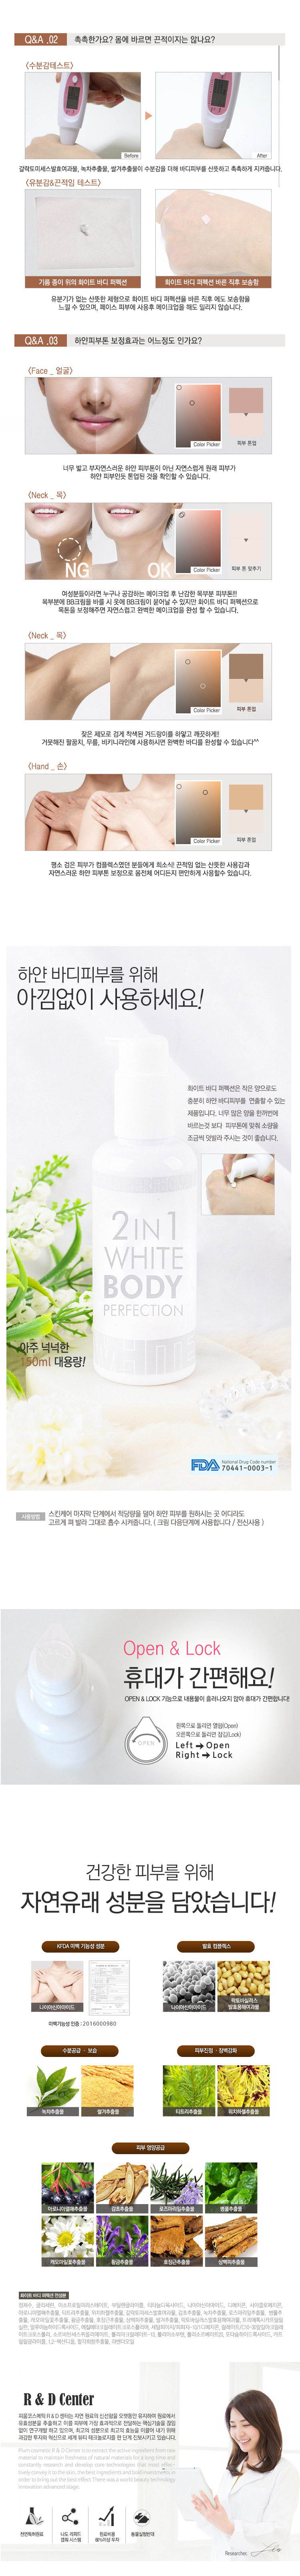 08_2in1white_body_perfection03.jpg